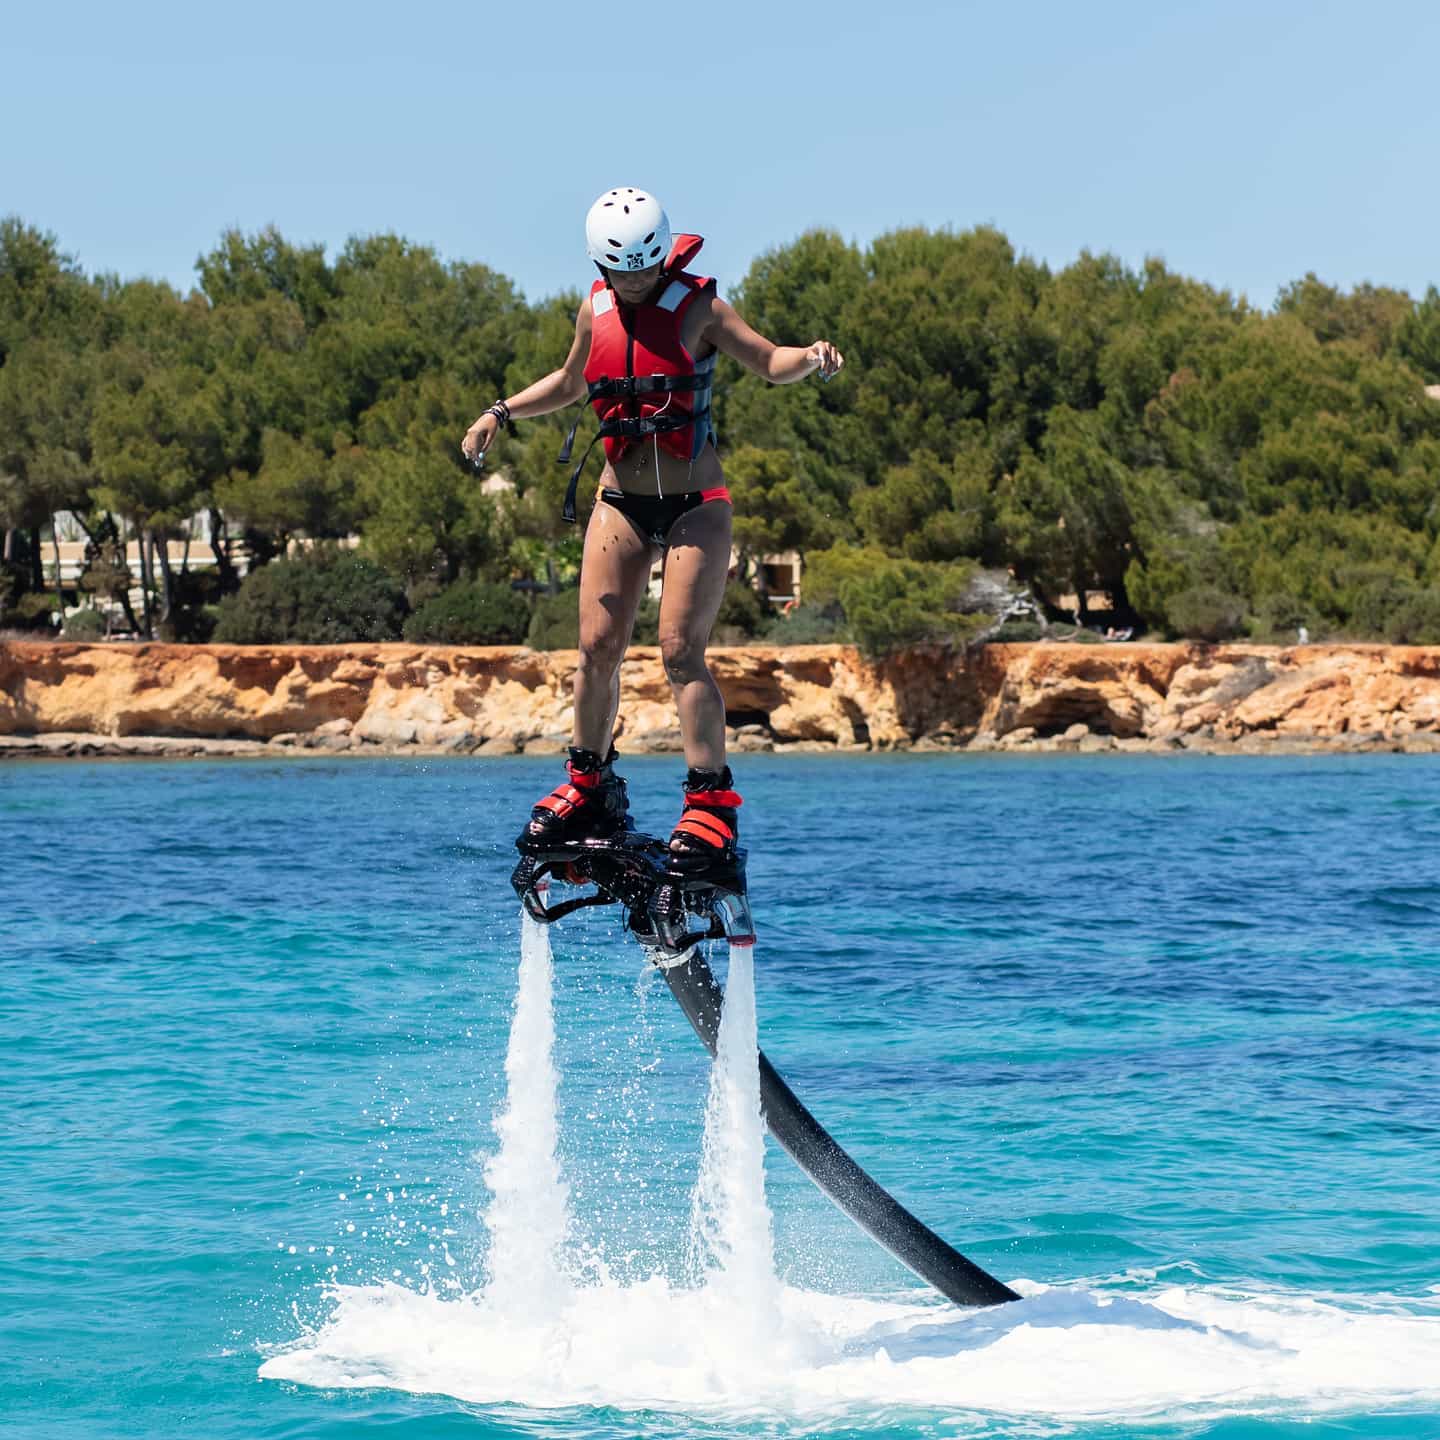 Fly above the water in Ibiza